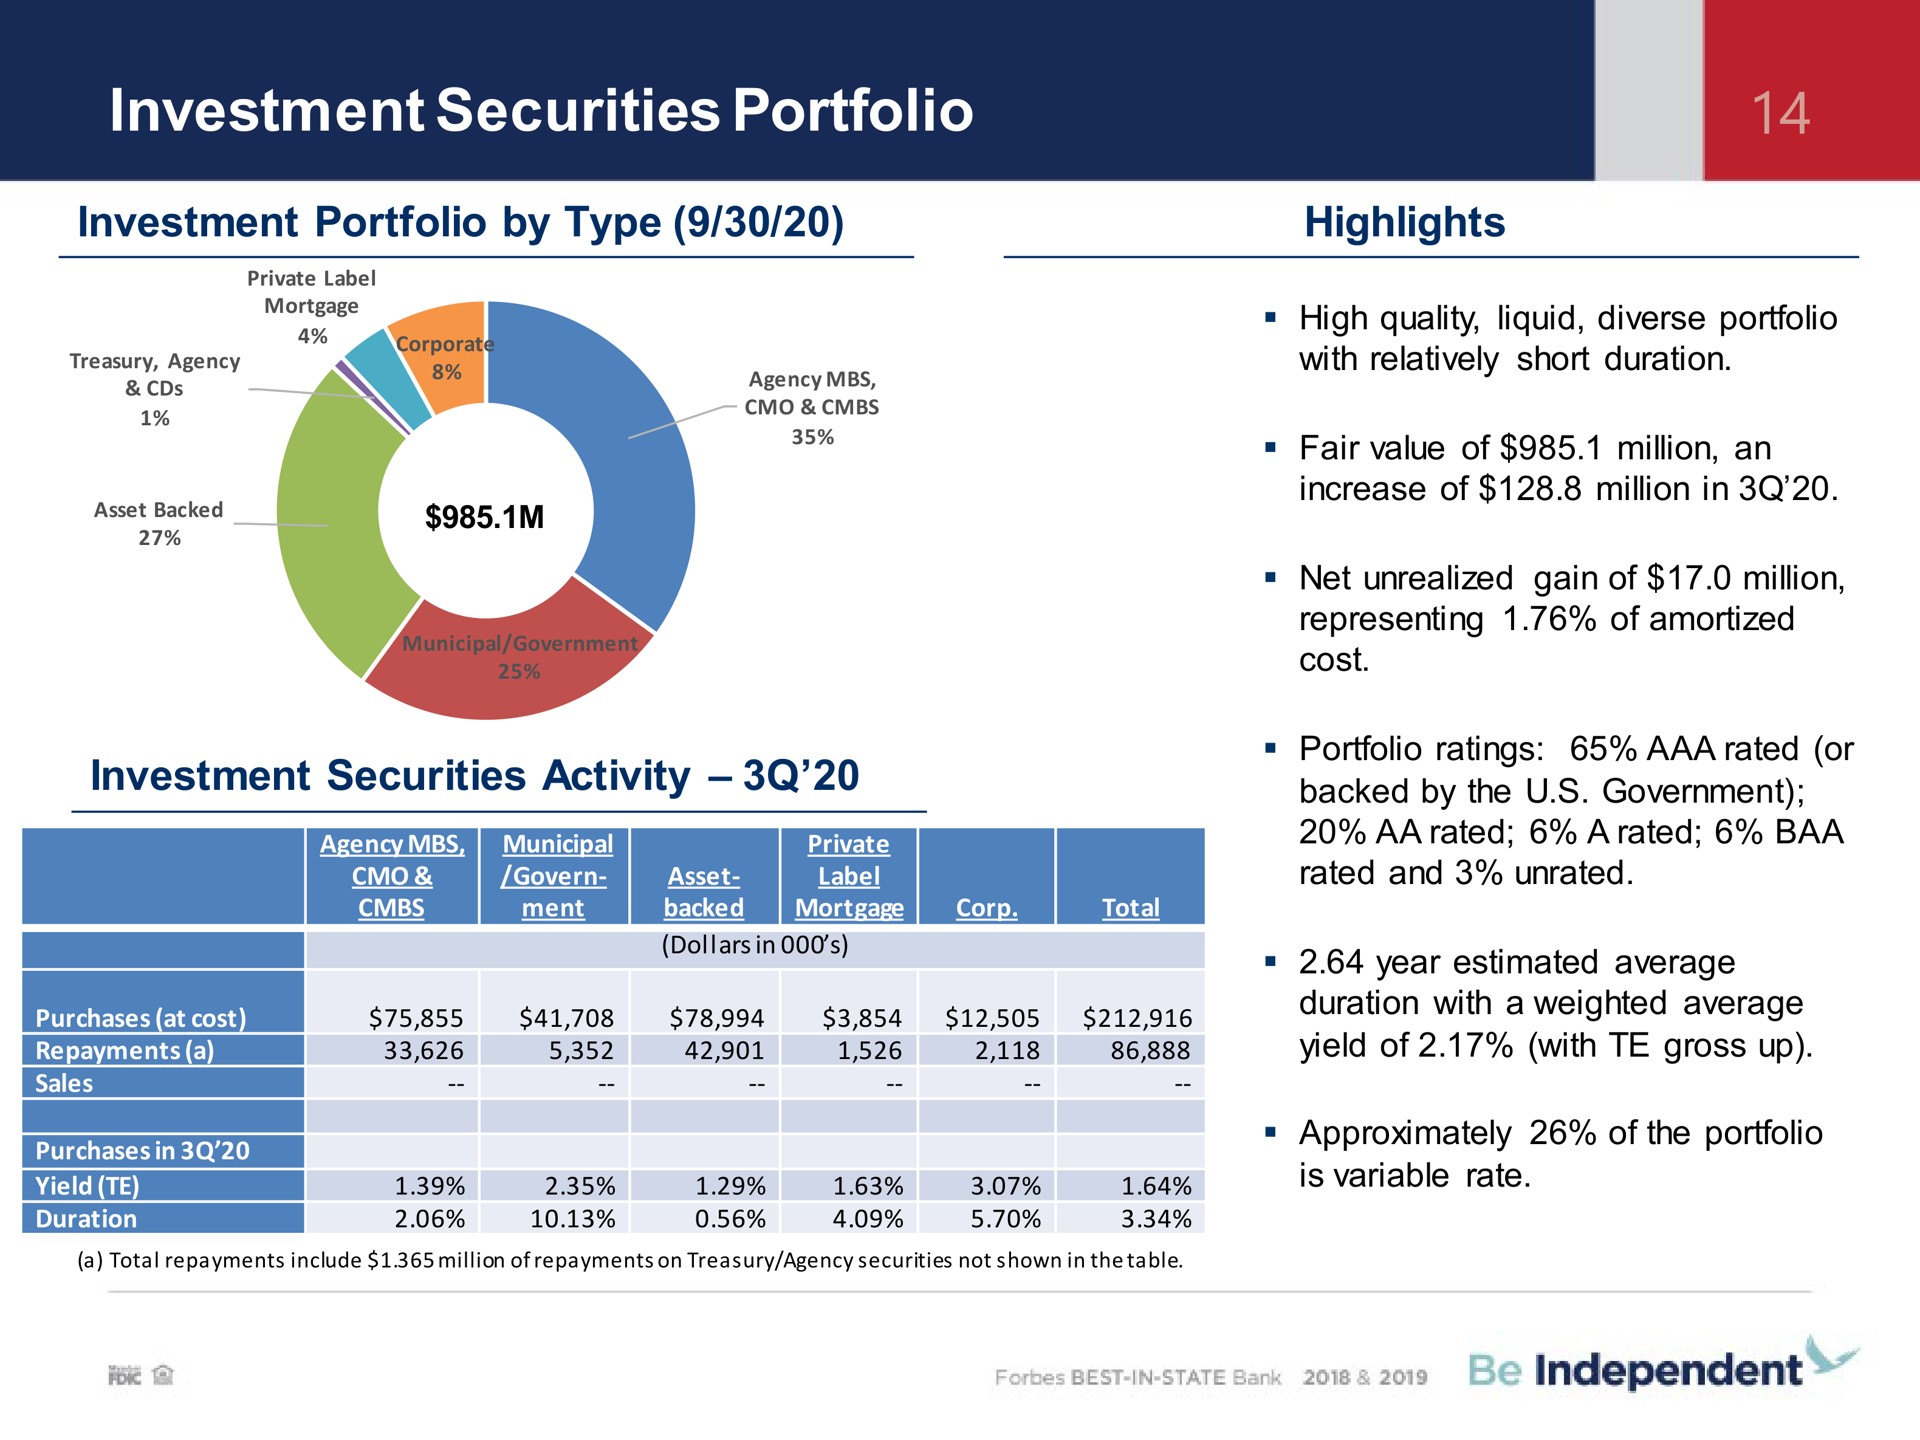 investment securities portfolio investment portfolio by type highlights investment securities activity soe | Independent Bank Corp